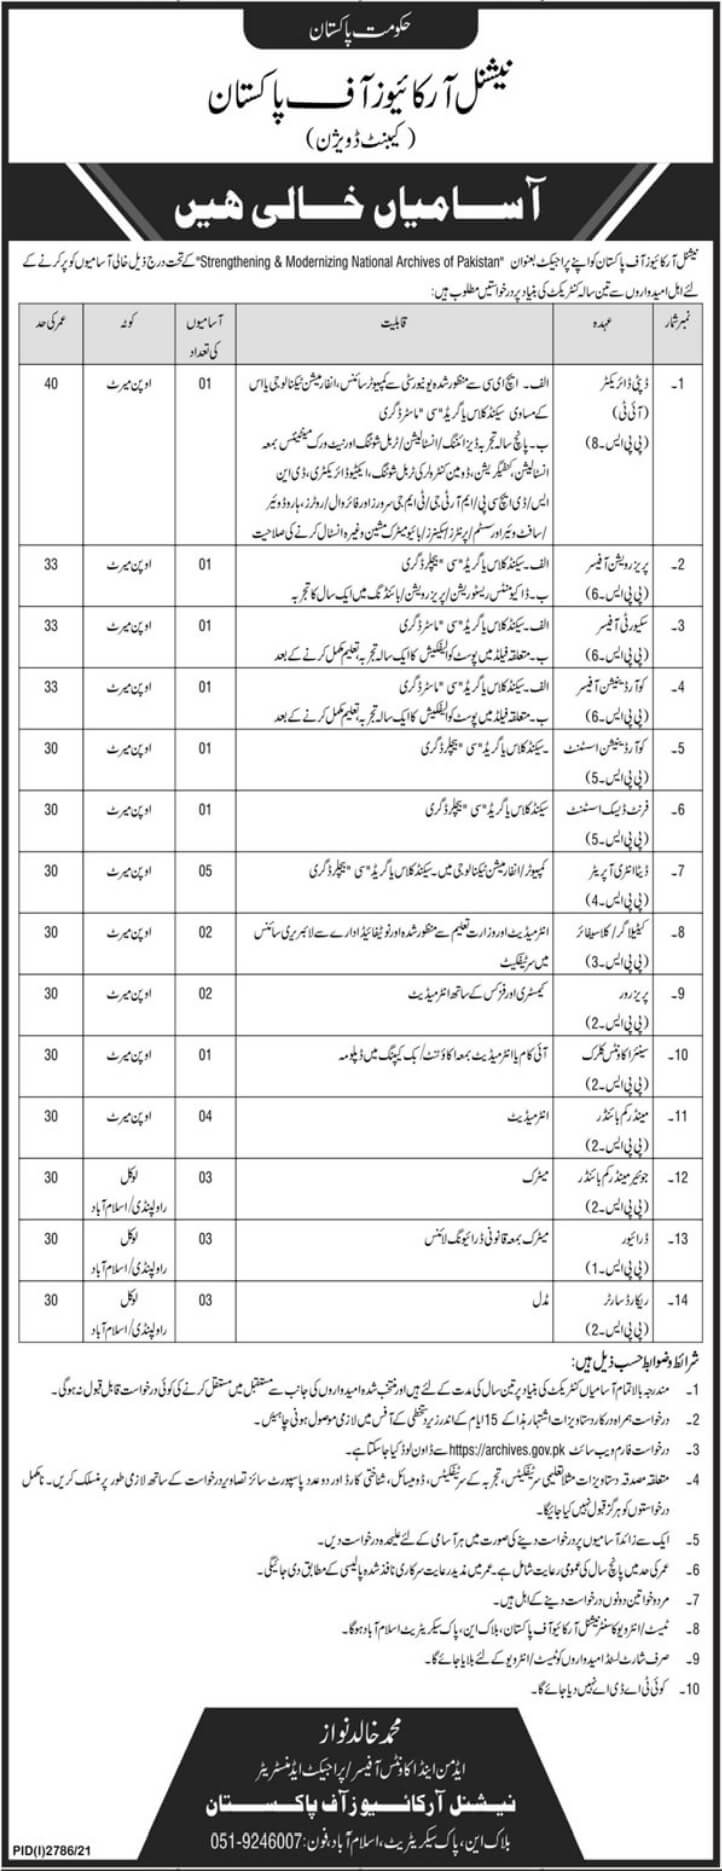 Government Jobs Matric Base 2021 National Archives of Pakistan